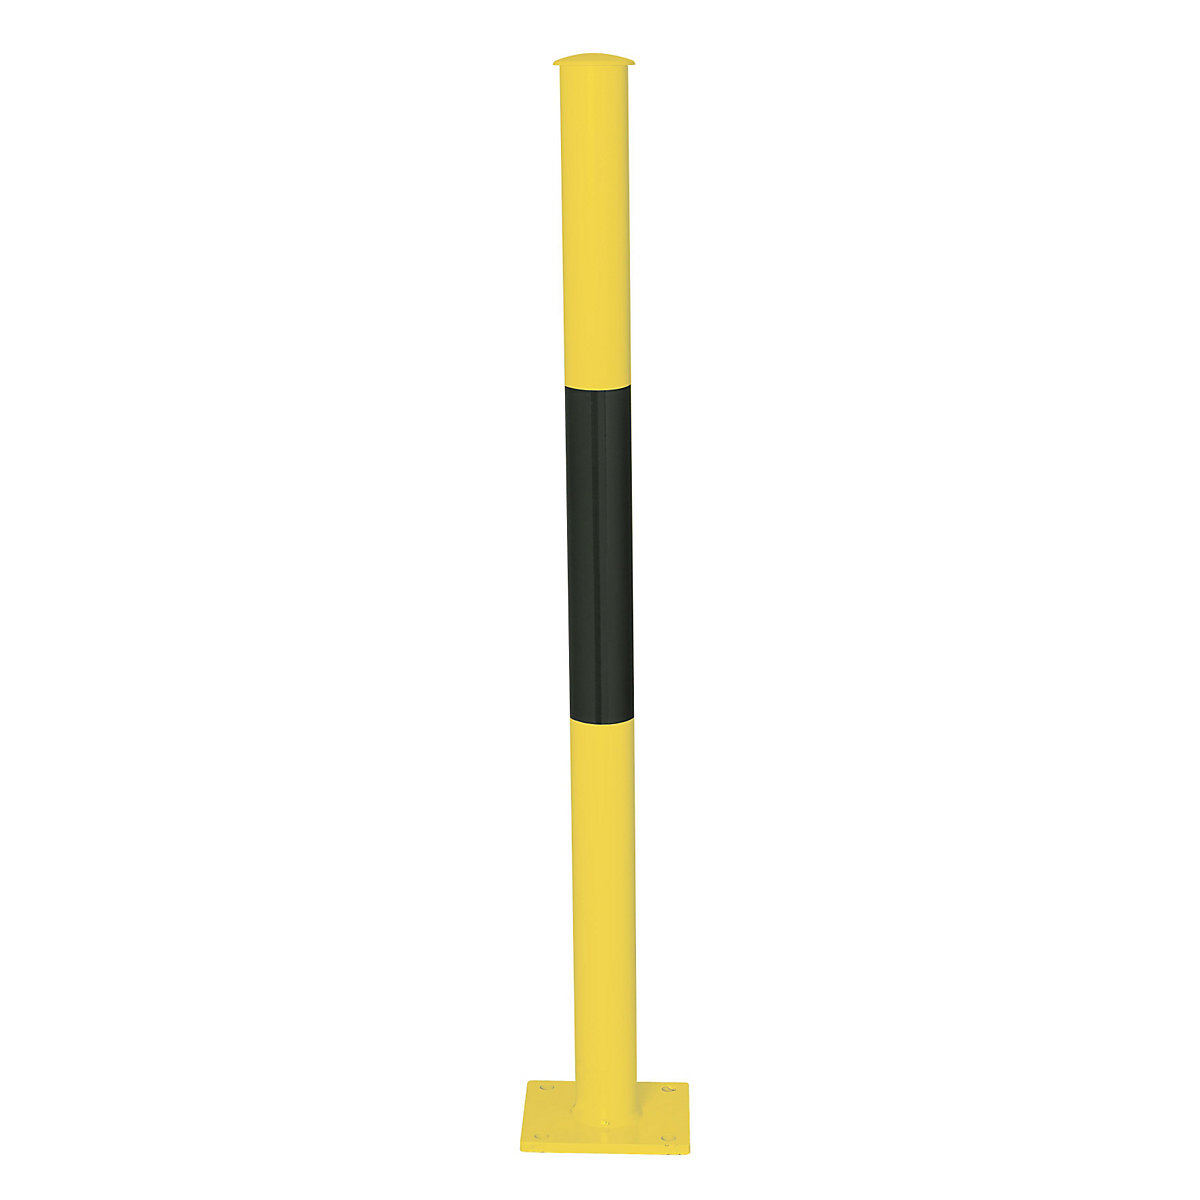 Railing system, upright with base plate, yellow/black